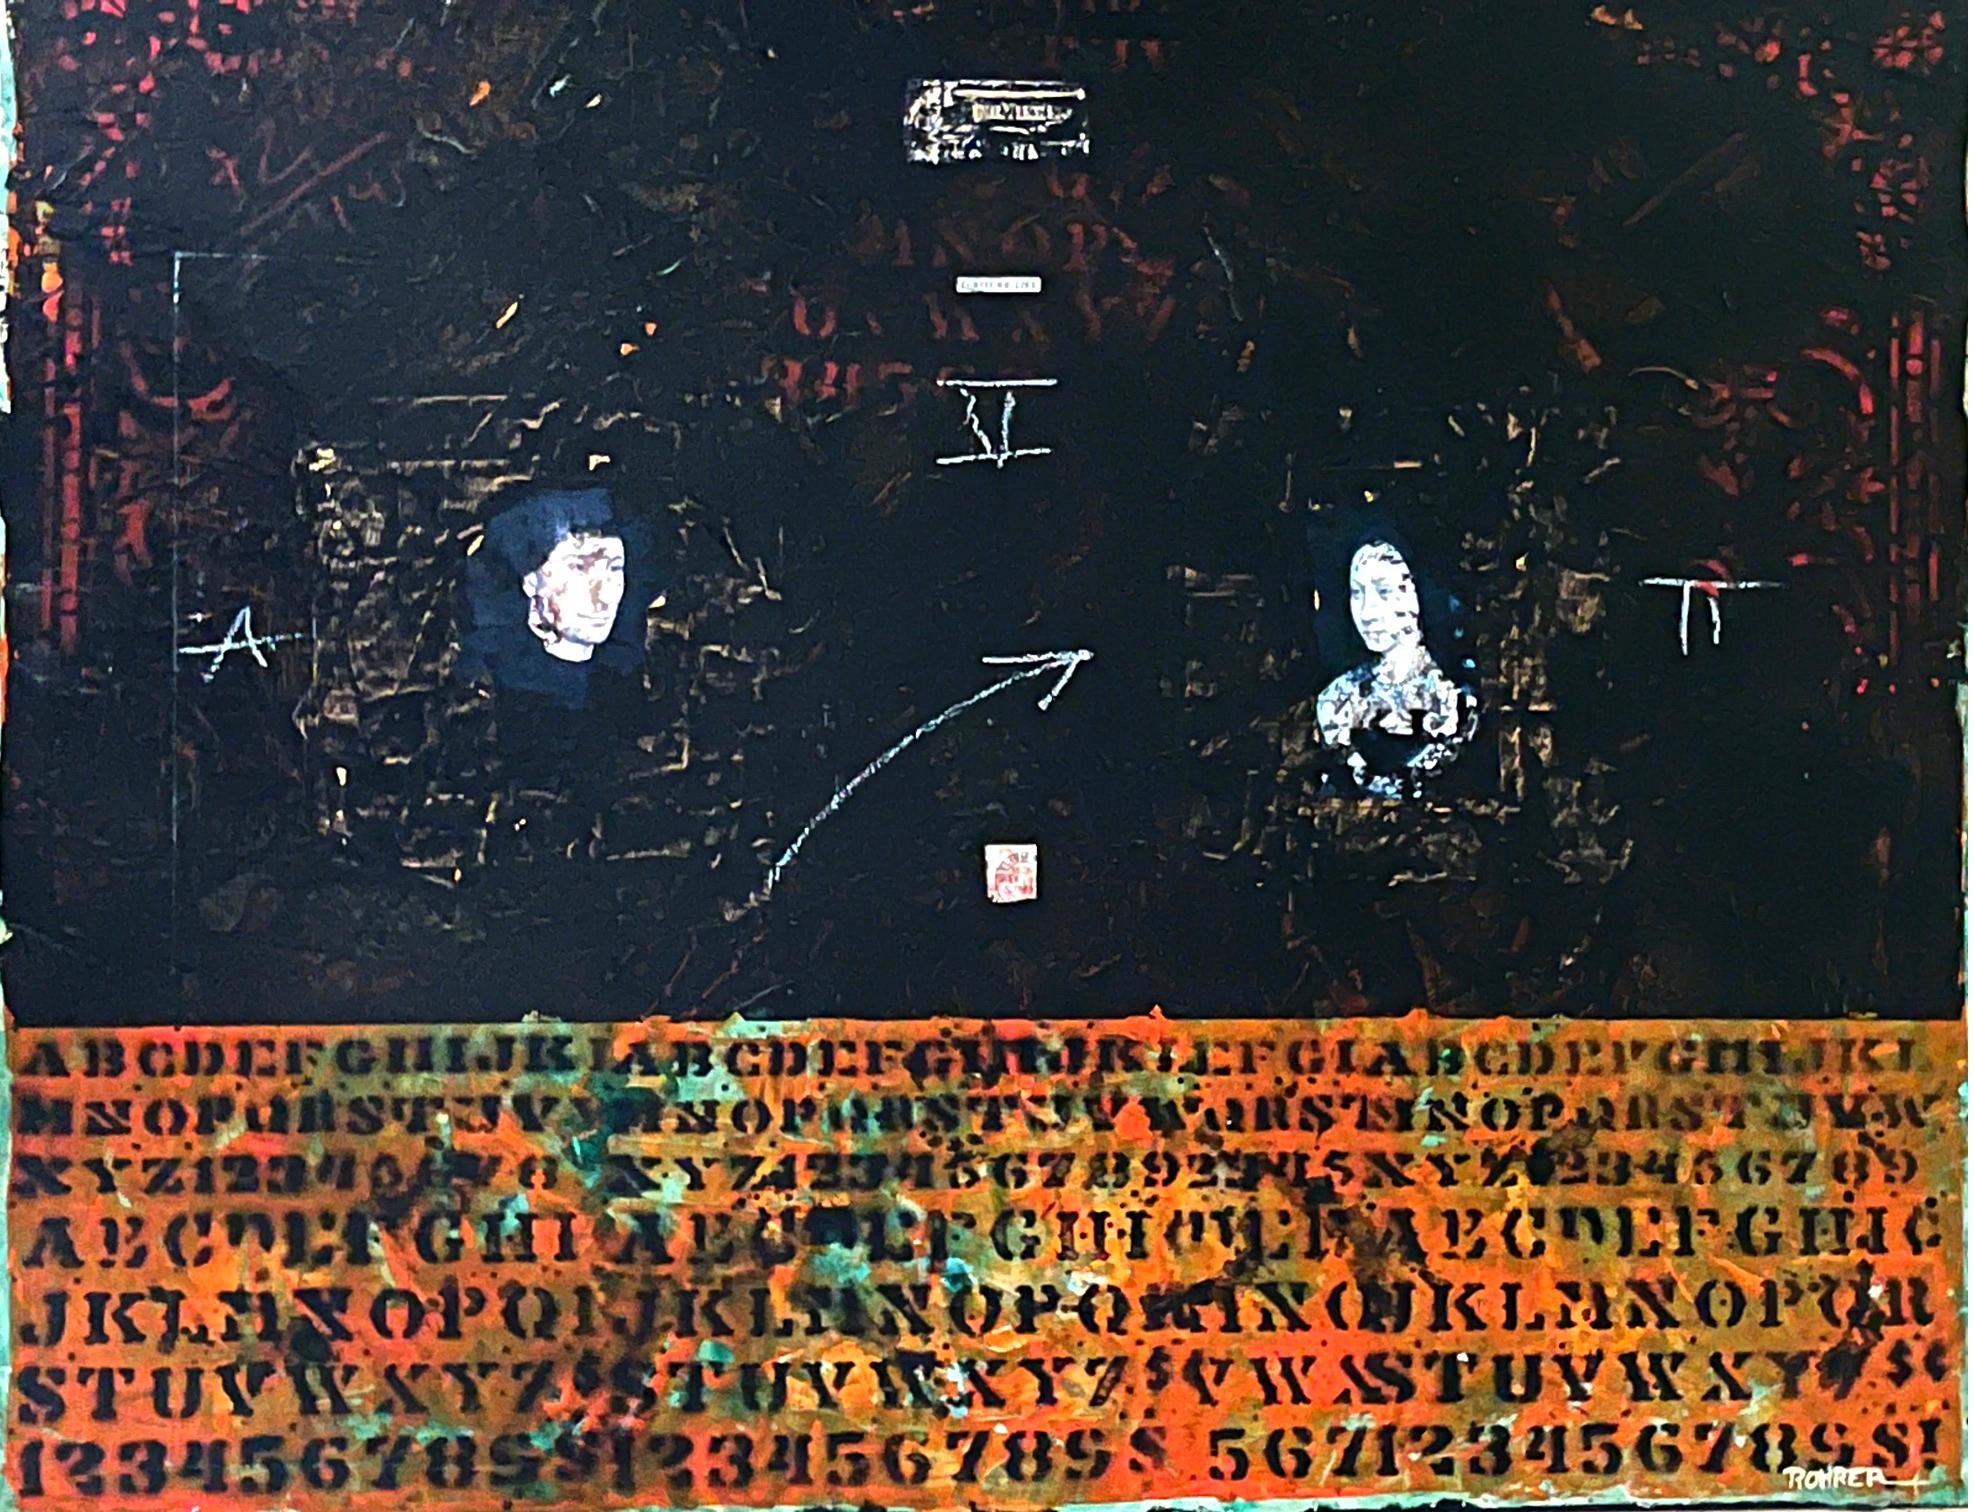 Title: Ecriture Liee (Linked Writing)
Artist: Jean-Daniel Rohrer (Swiss Canadian, 1960-).
Media: Mixed media on Canvas (collage, stencil, chalk and oil on canvas).
Year: 2007
Size: 24